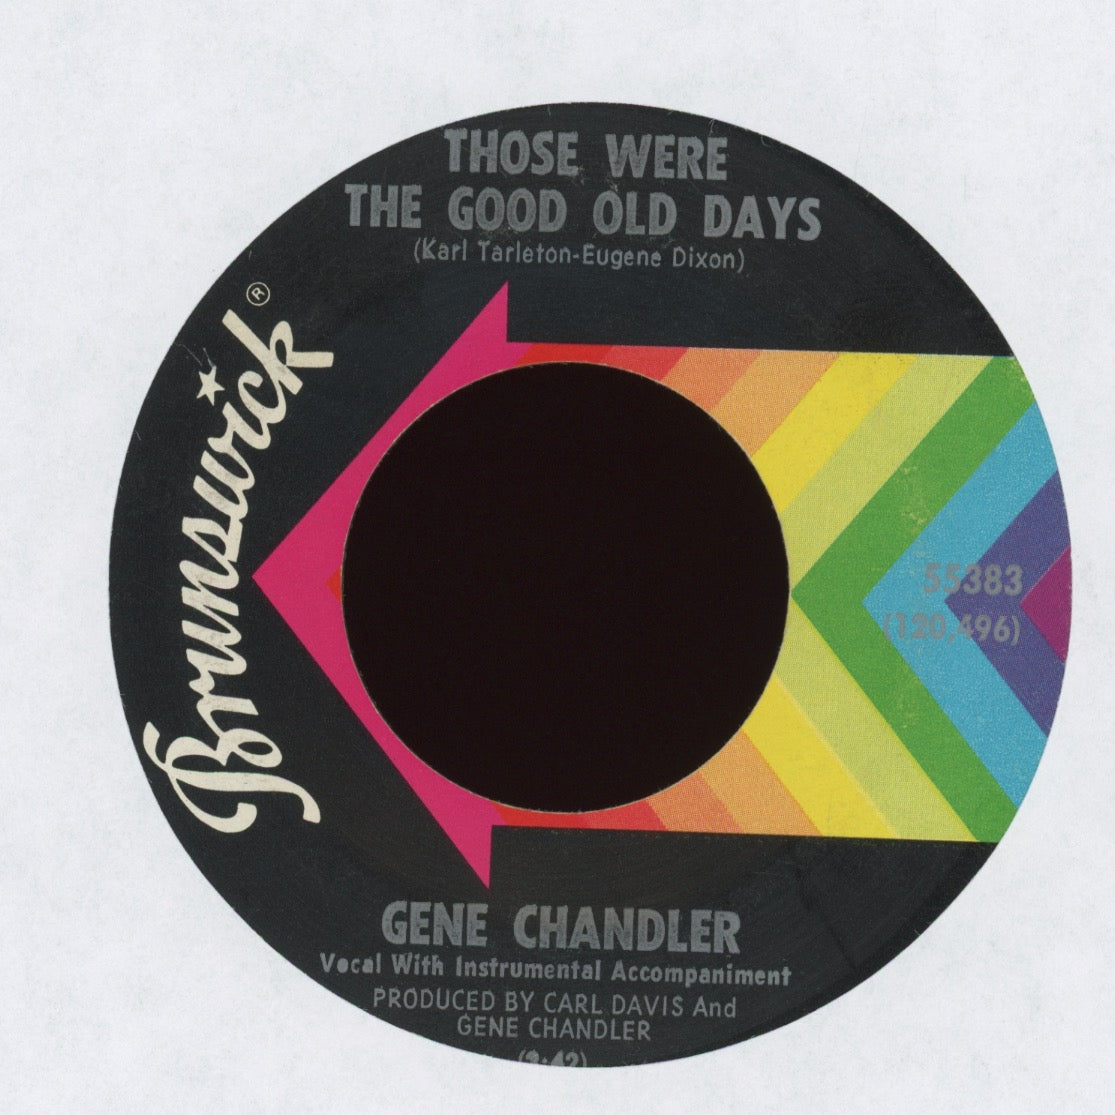 Gene Chandler - There Was A Time on Brunswick